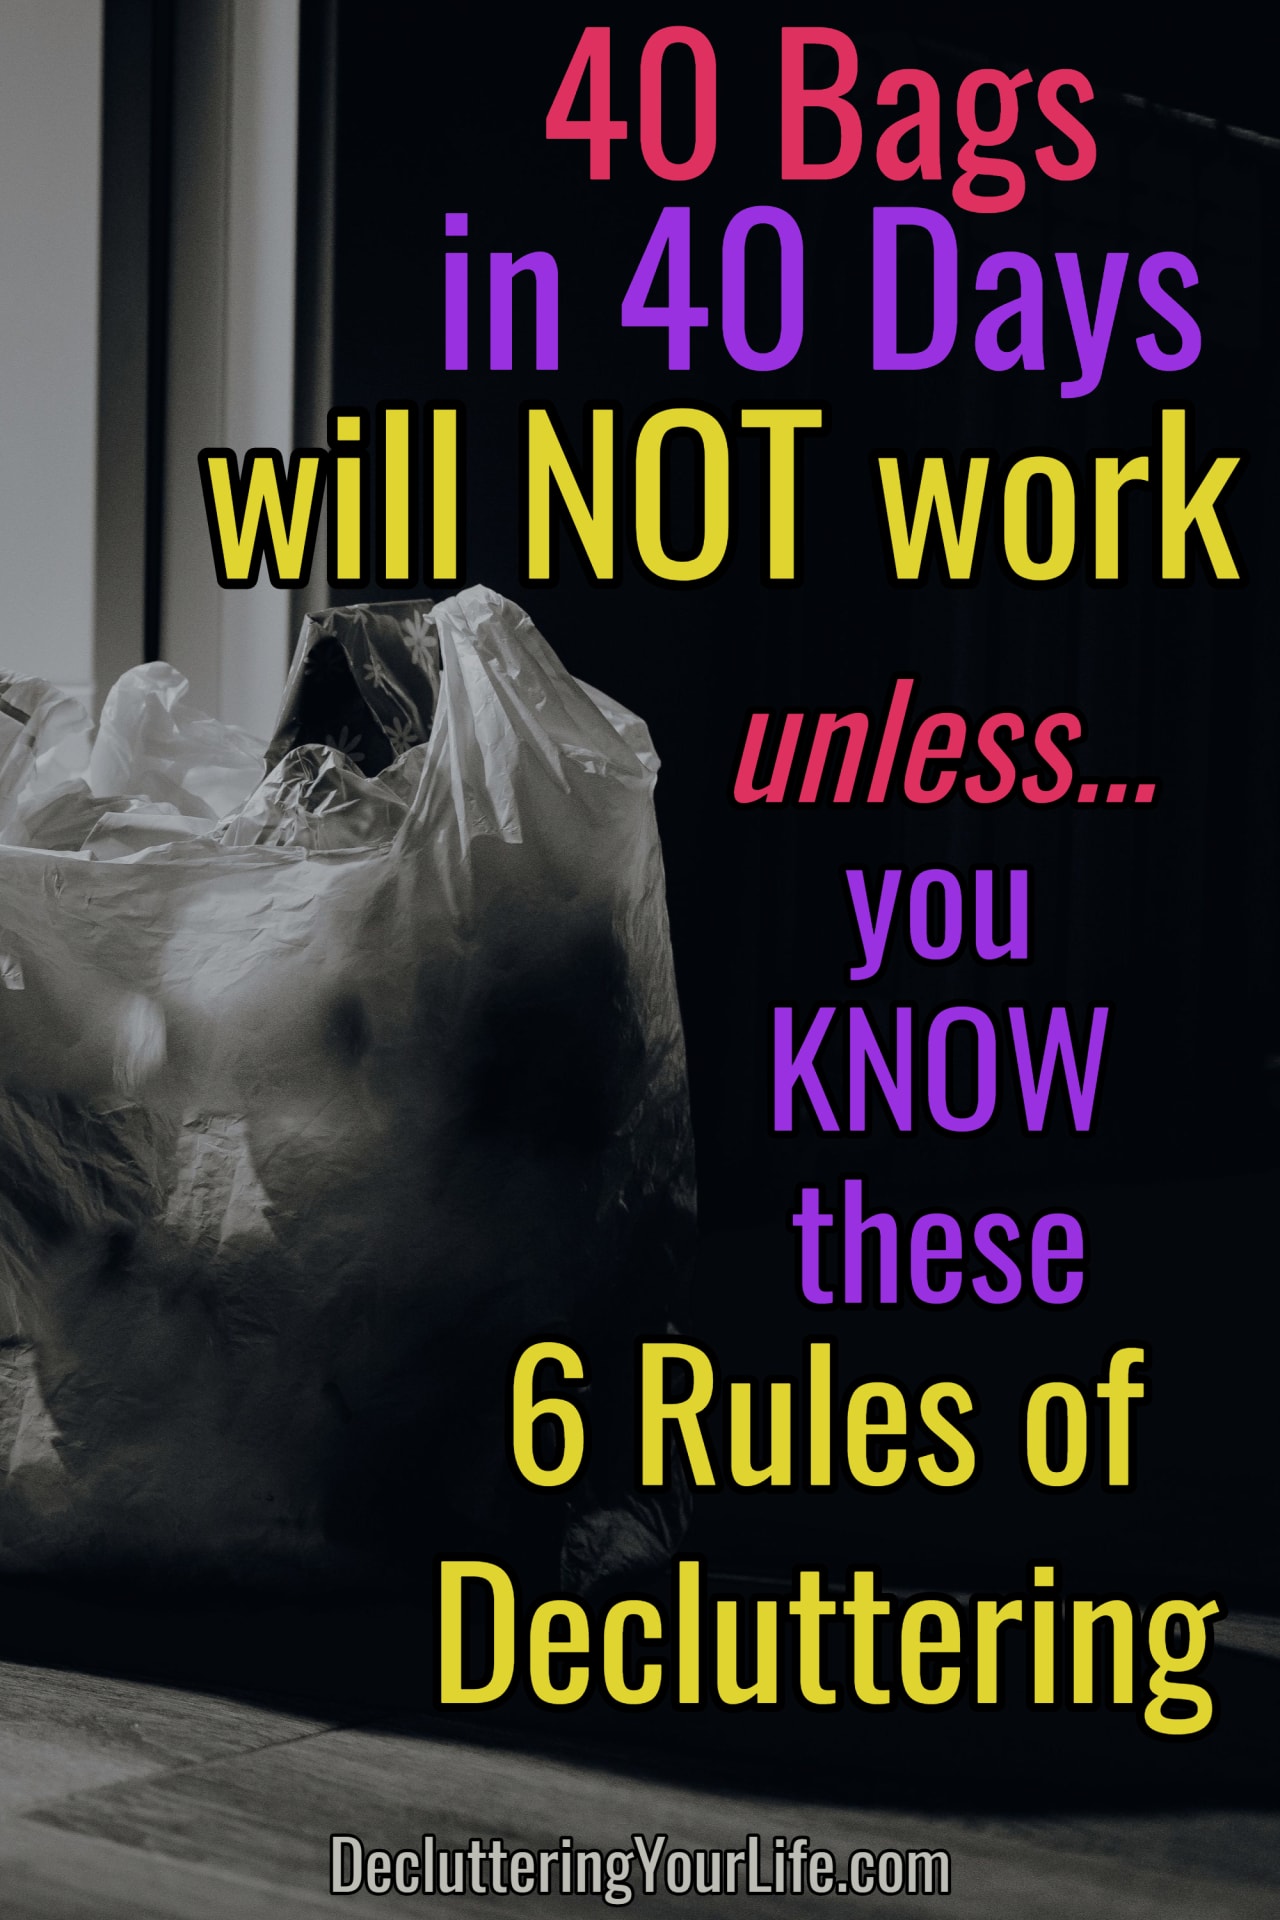 Doing 40 Bags in 40 Days declutter system?  Trying to get your messy house clean, organized and clutter free?  It's REALLY important to know the 40 bags in 40 days Rules to be sure you are a success and that you really learn how to declutter and organize your home the RIGHT way.  Here are the 6 rules of success for 40 bags in 40 days and for ANYONE decluttering their home.